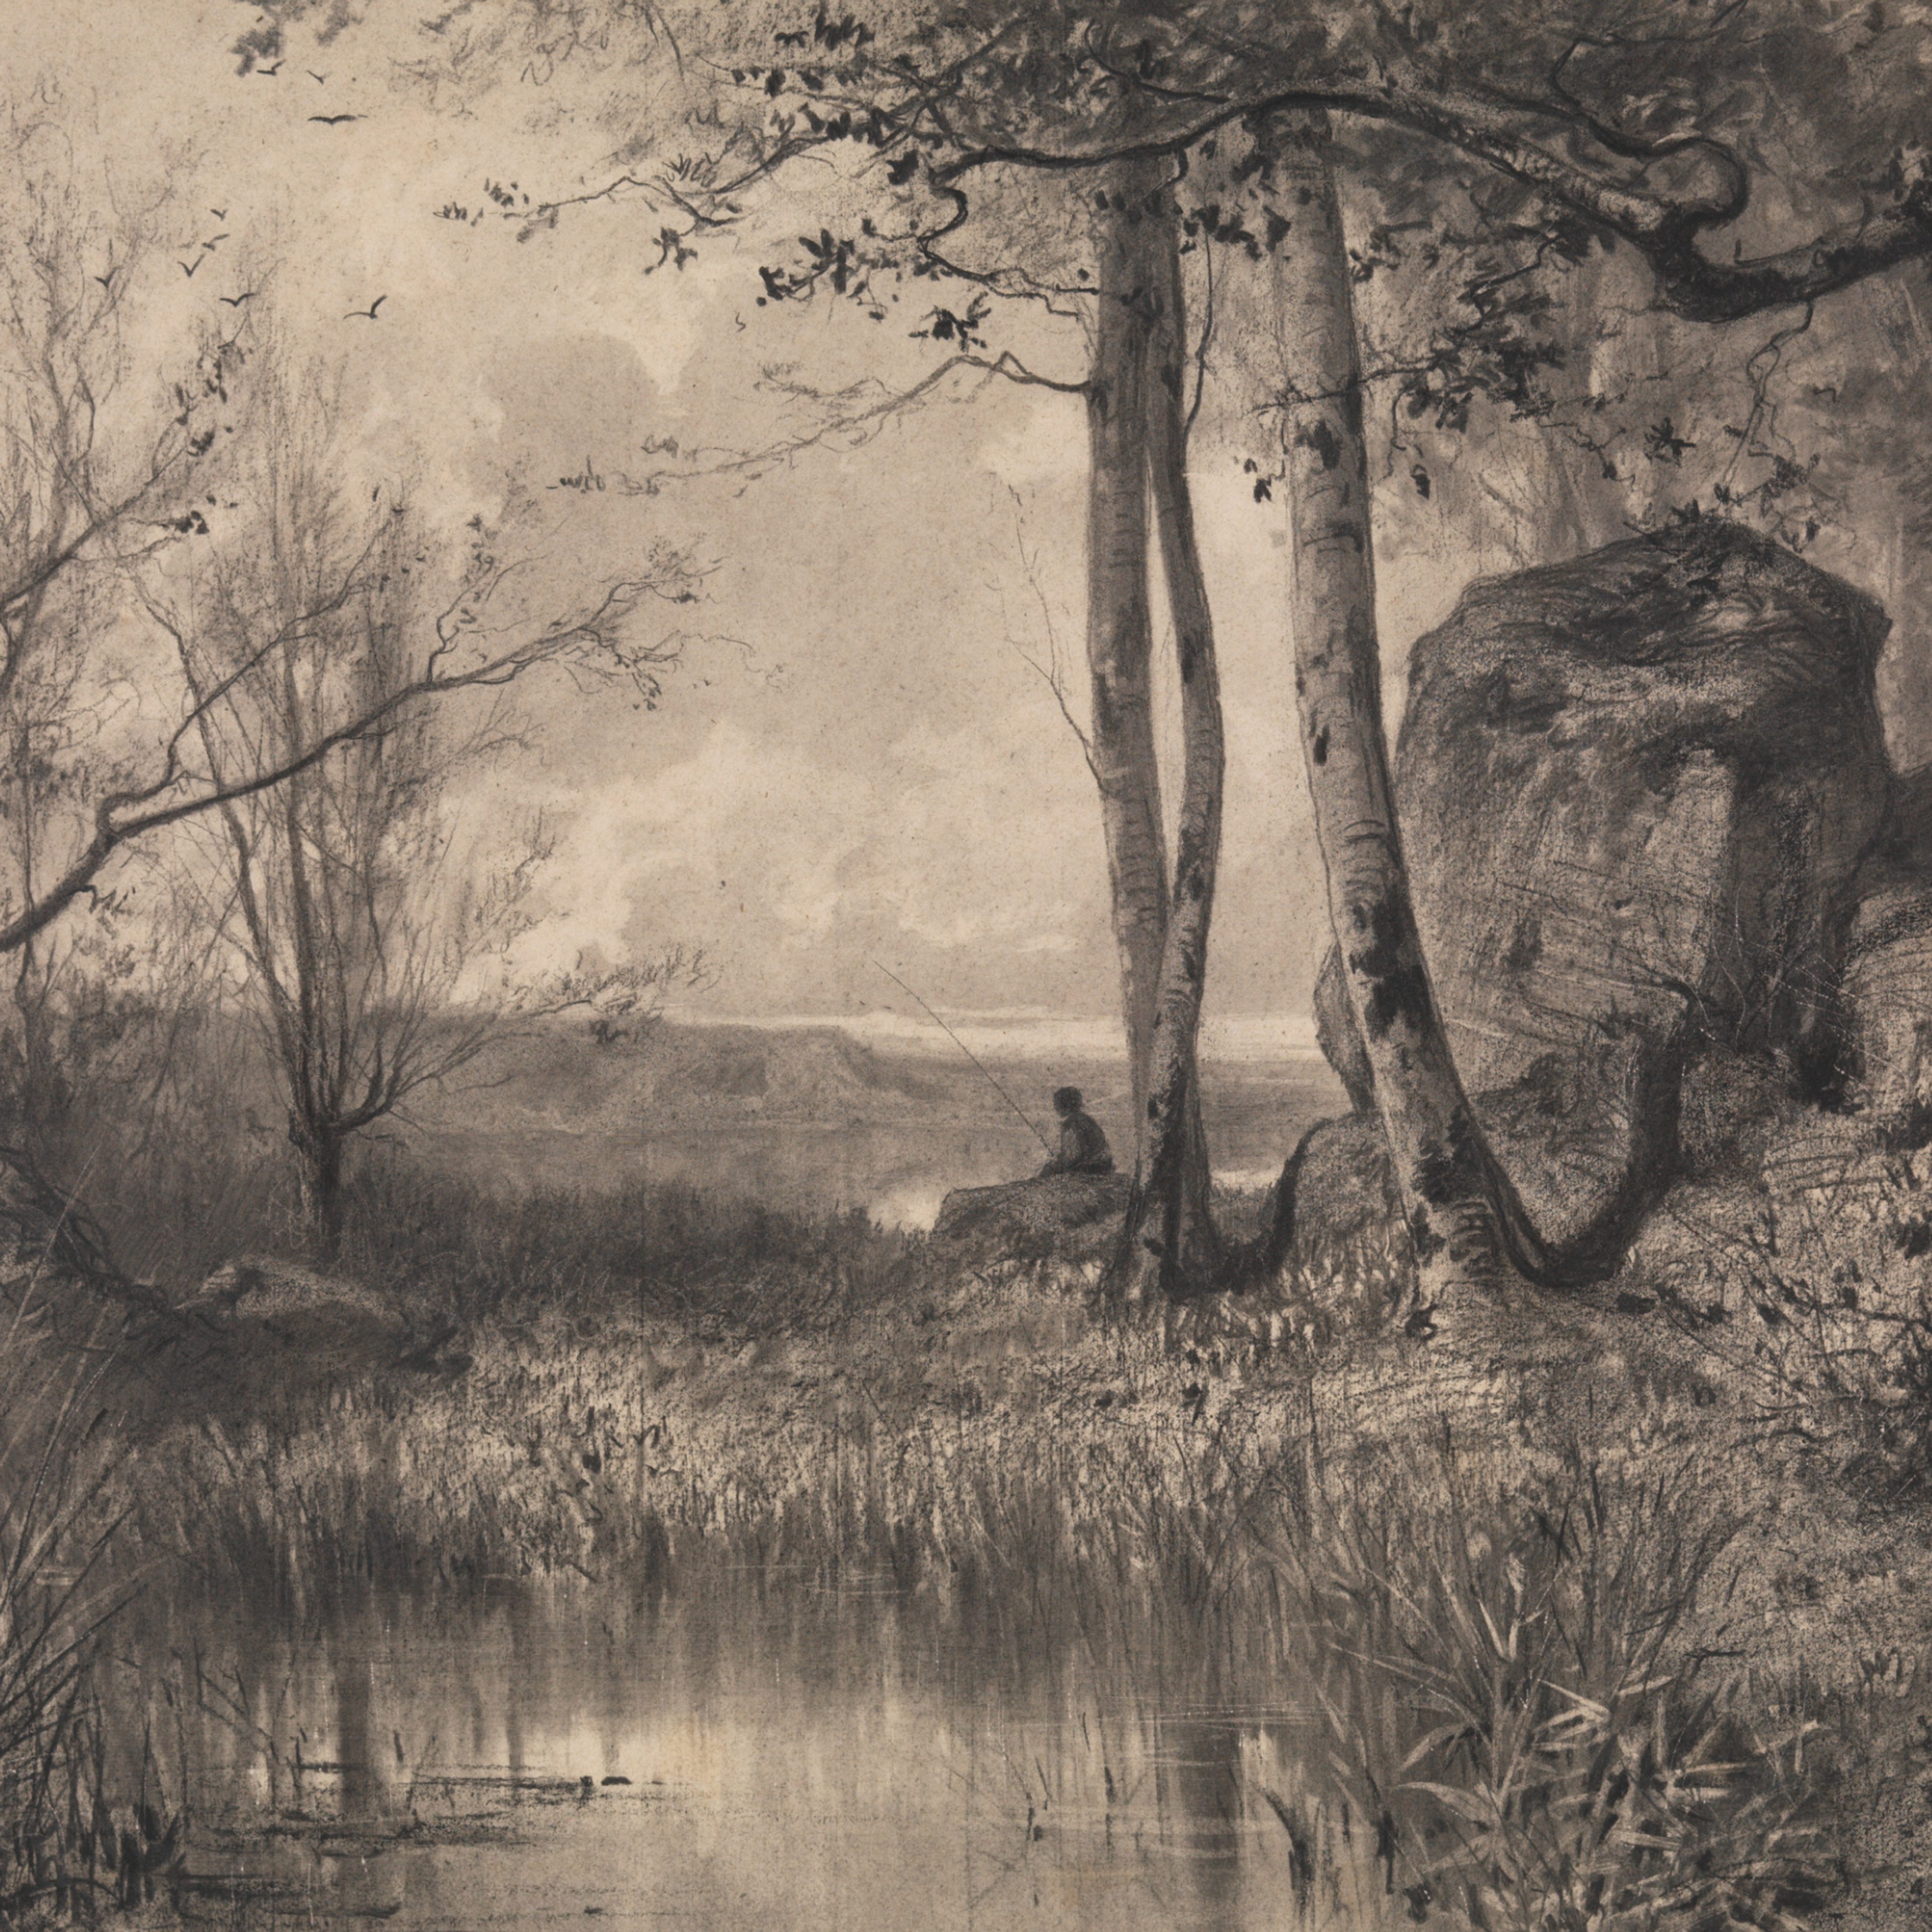 Dark grey and sepia drawing of a landscape with trees, rocks, and a lake in the foreground. A figure sits on the rock in the center of the composition, facing away and looking at the landscape.